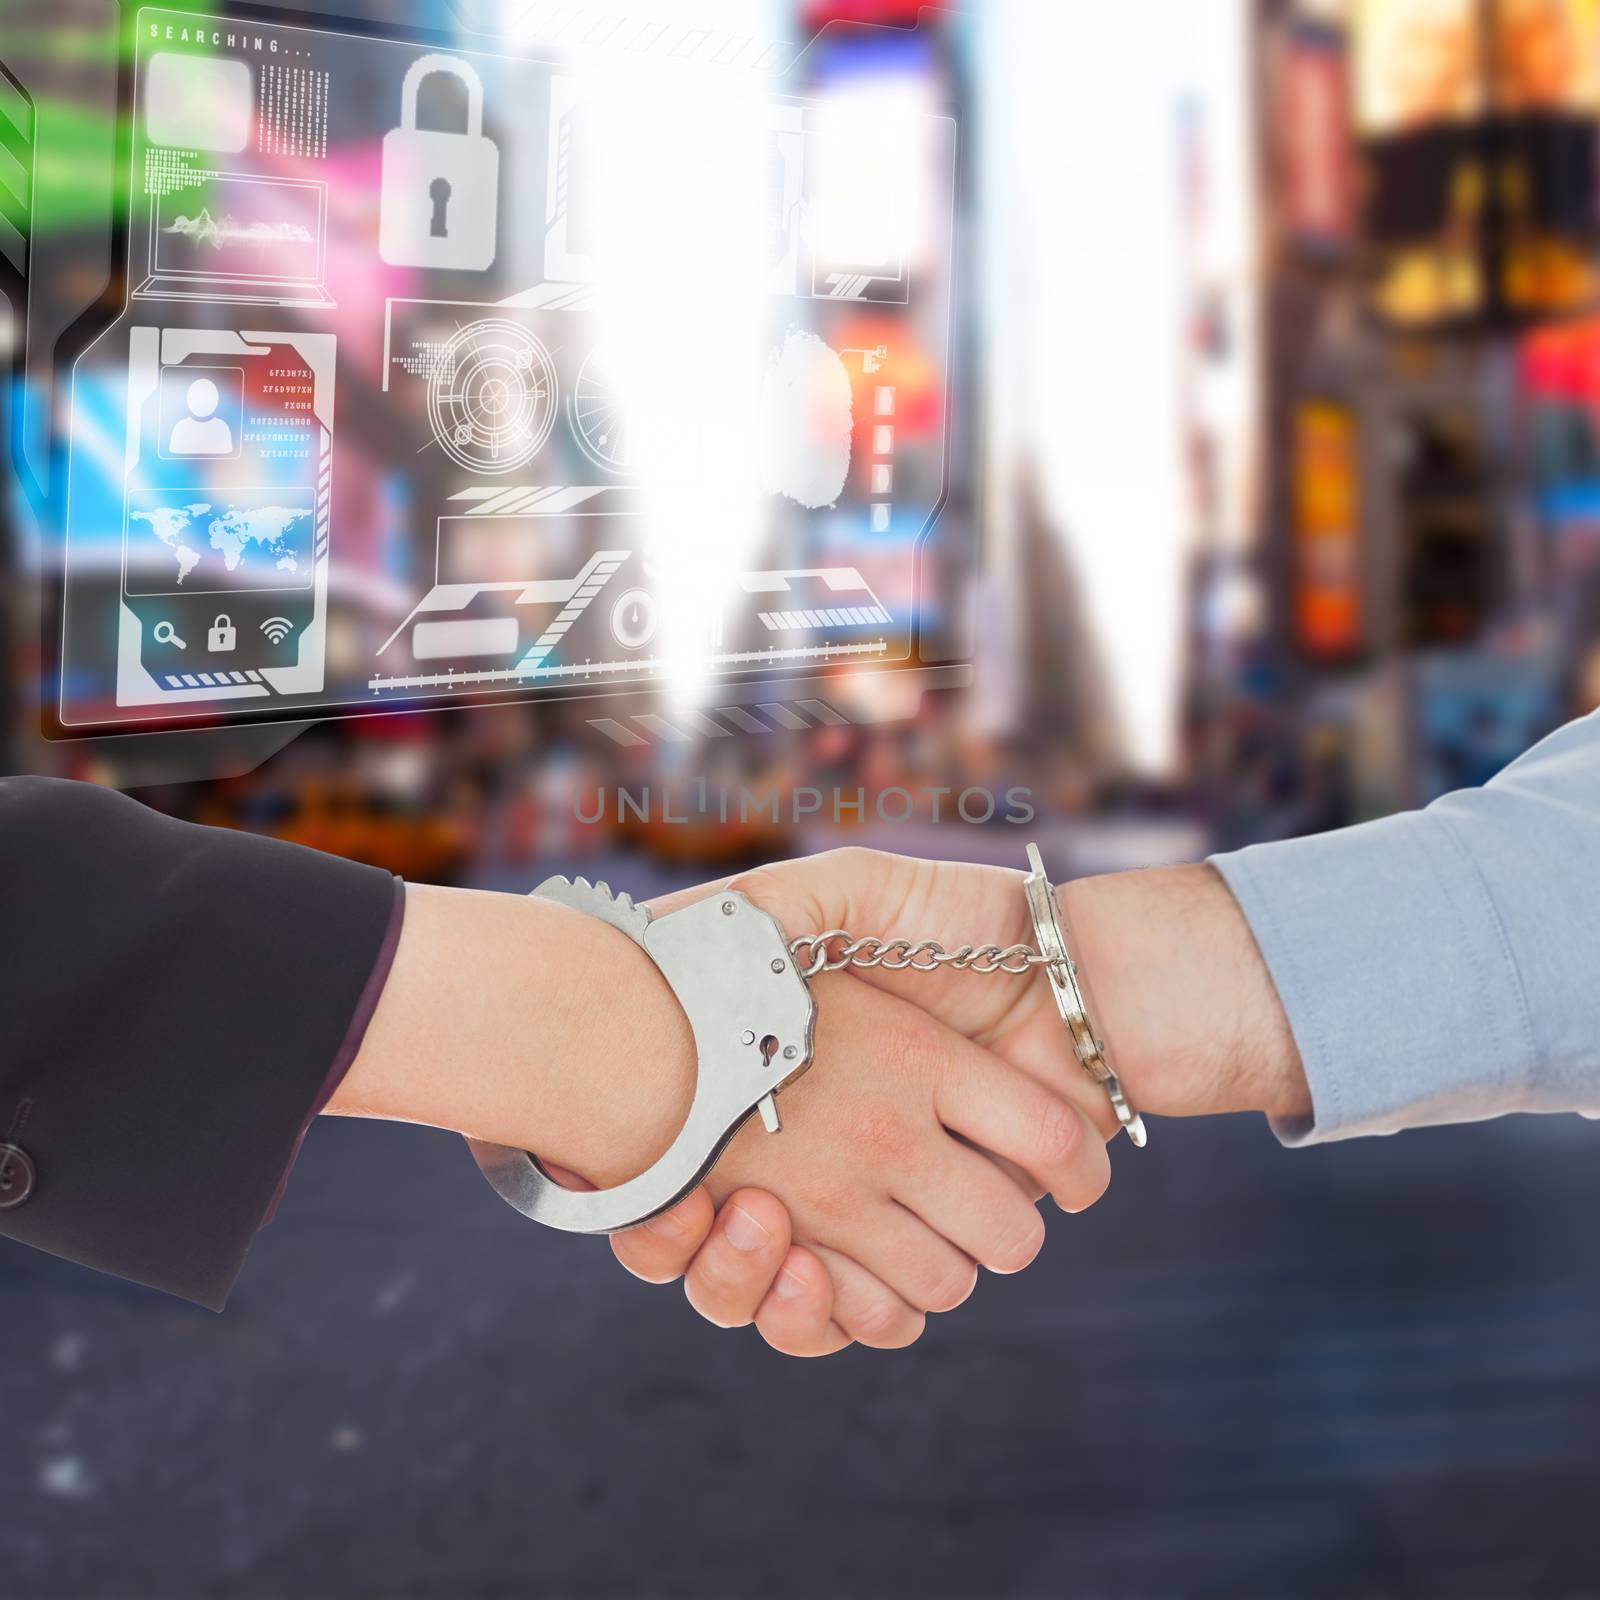 Composite image of business people in handcuffs shaking hands by Wavebreakmedia